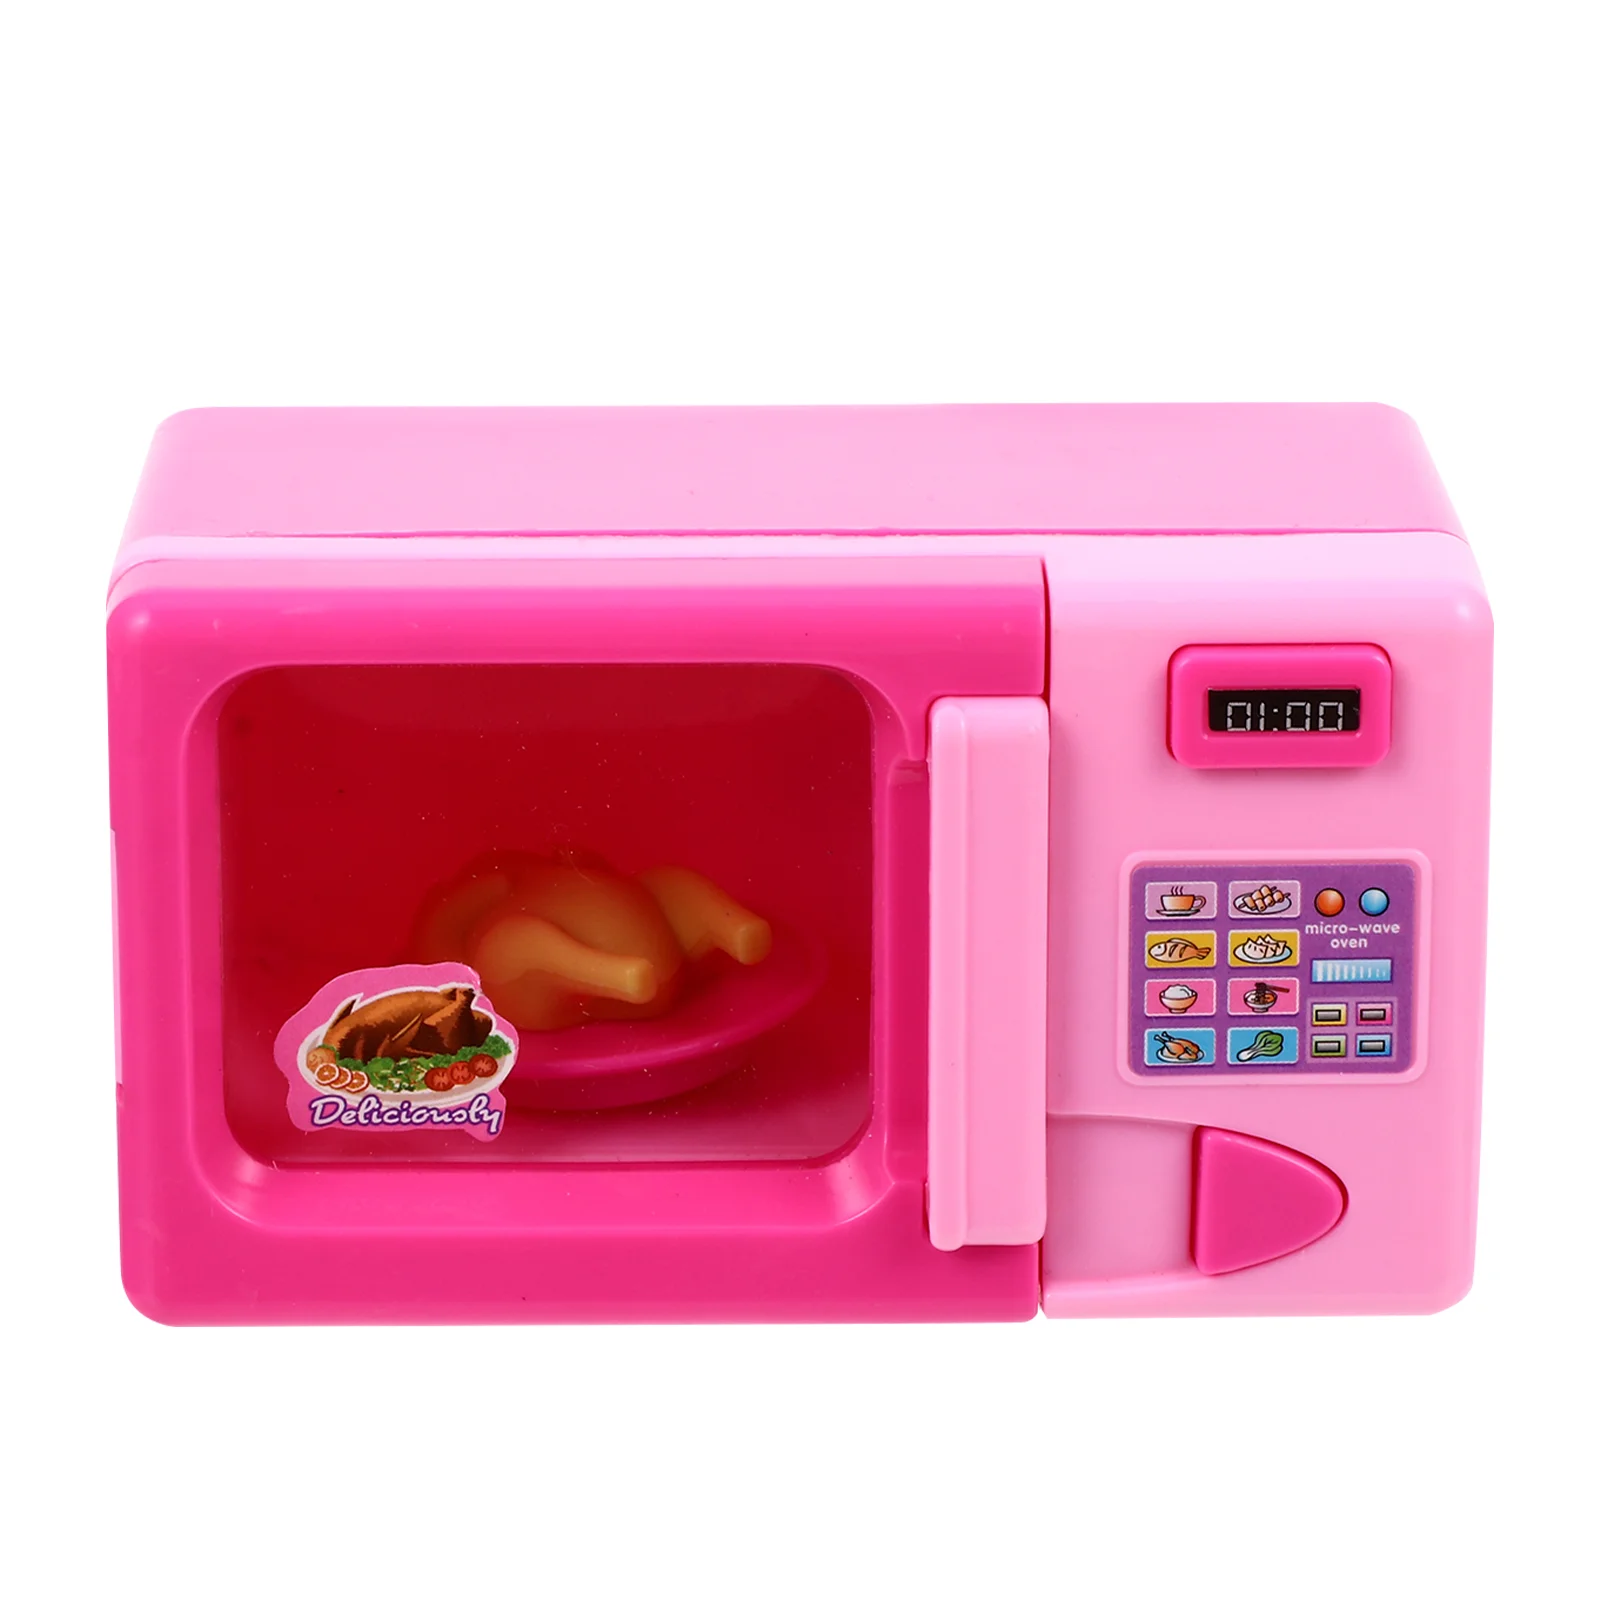 

Toy Microwave Oven Kitchen Play Miniature Model Toys Pretend Accessories Mini Toddlers Kids Appliance Cookware Kitchenware Decor